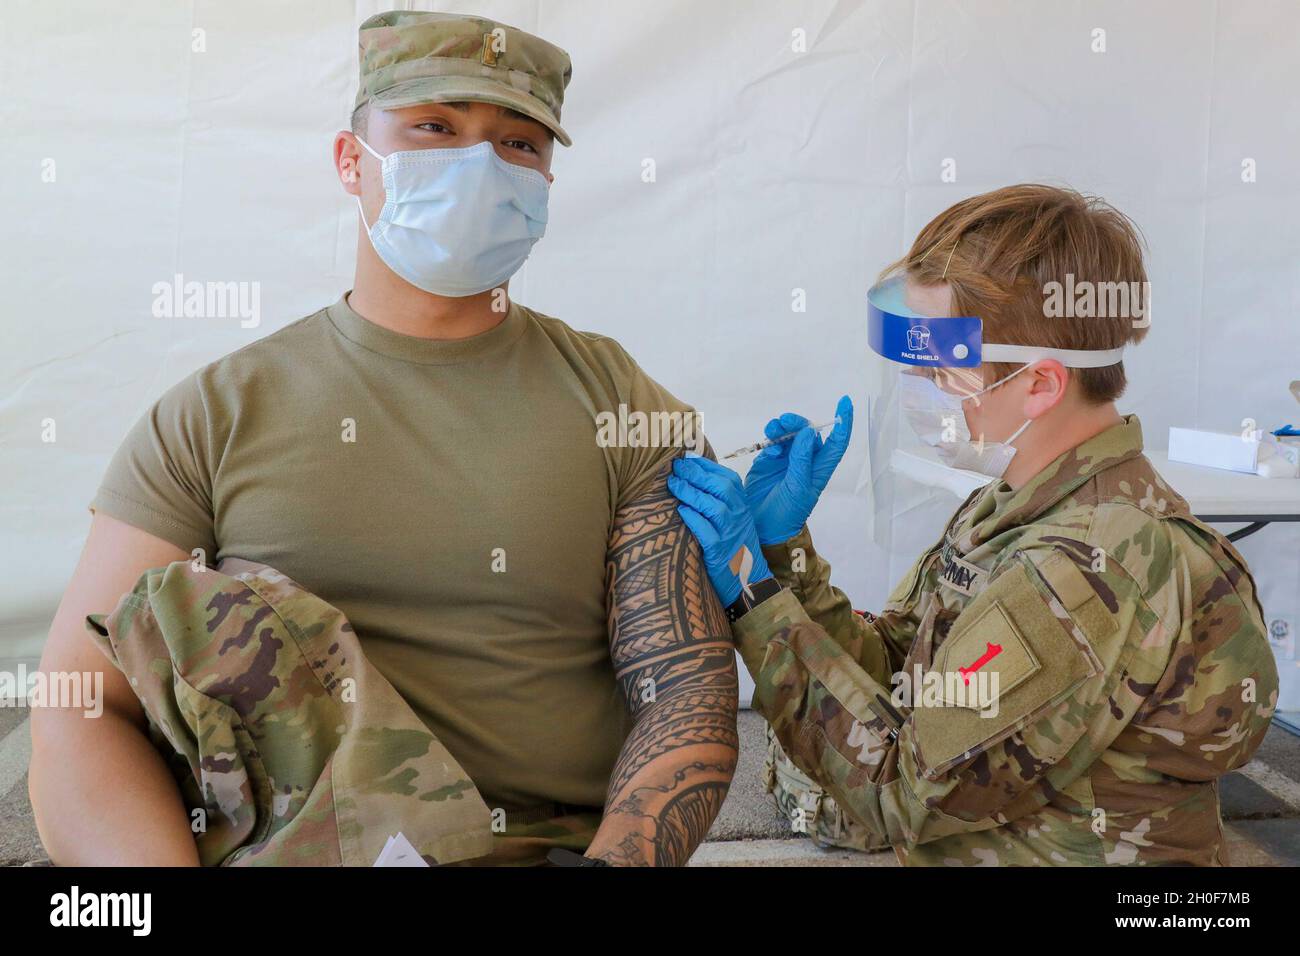 Spc. Zoe Festge, right, a combat medic assigned to 1st Battalion, 7th Field Artillery Regiment, 2nd Armored Brigade Combat Team, 1st Infantry Division, administers a dose of the COVID-19 vaccine to 2nd Lt. Joshua Ancheta, a medical-surgical nurse assigned to Madigan Army Medical Center at Joint Base Lewis-McChord, at the Fair Park COVID Community Vaccination Center in Dallas, on Feb. 23, 2021. U.S. Northern Command, through U.S. Army North, remains committed to providing continued, flexible Department of Defense support to the Federal Emergency Management Agency as part of the whole-of-governm Stock Photo